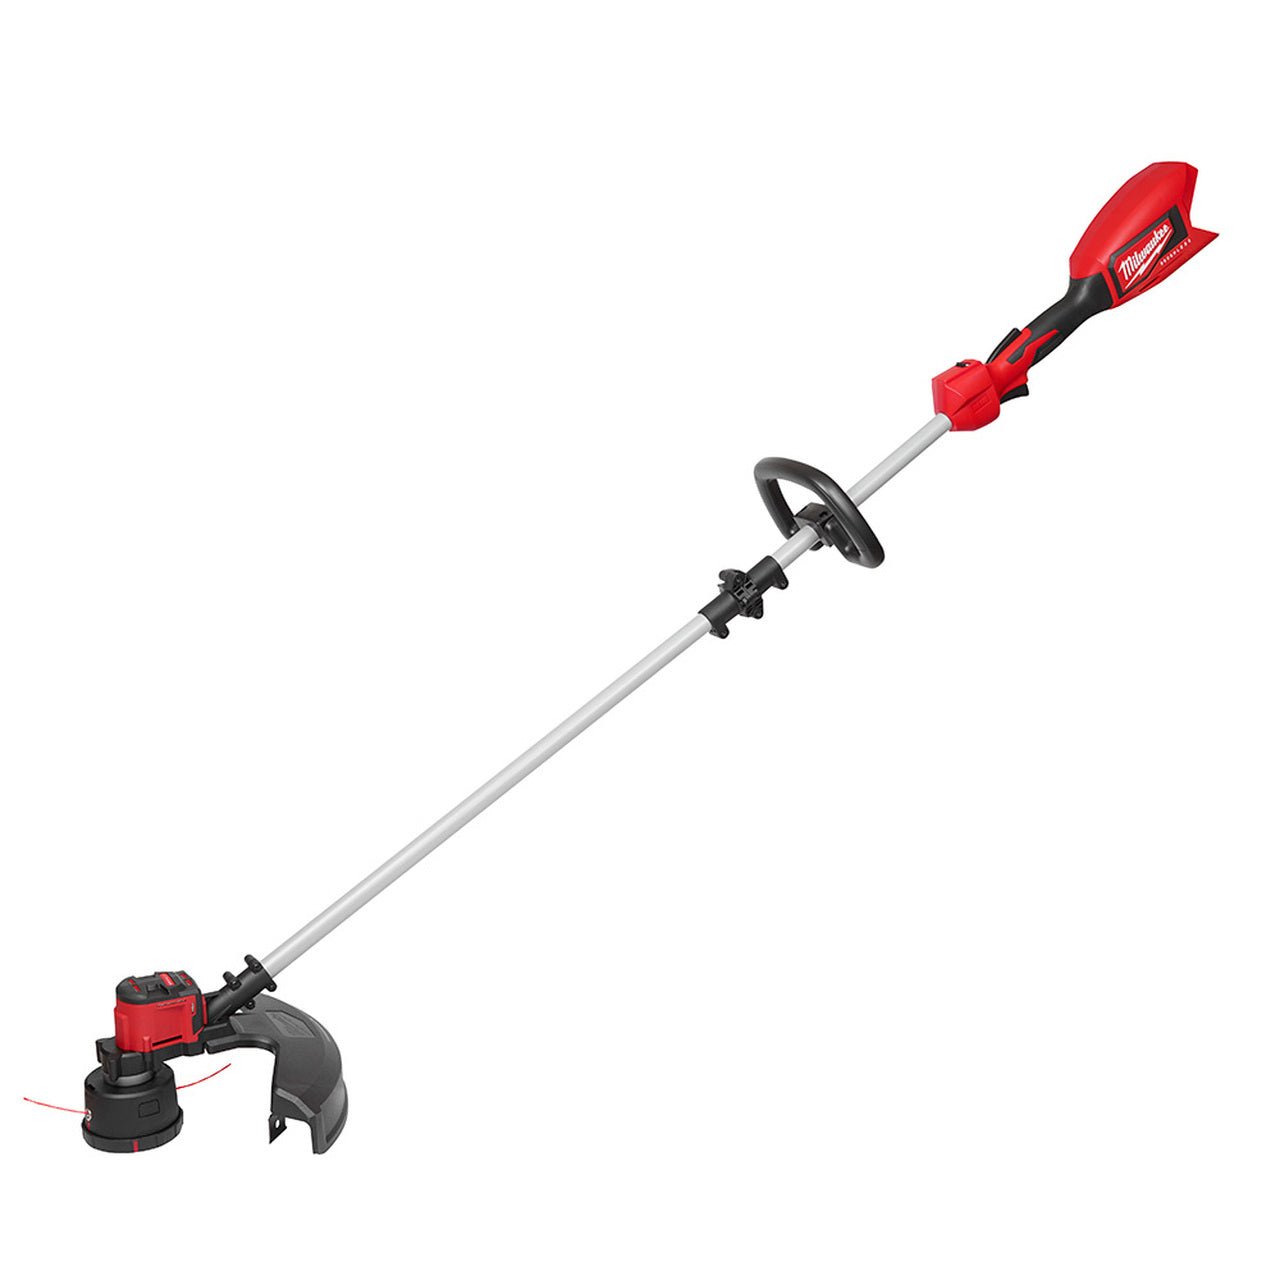 MILWAUKEE 2828-20  -  M18 STRING TRIMMER - BARE TOOL